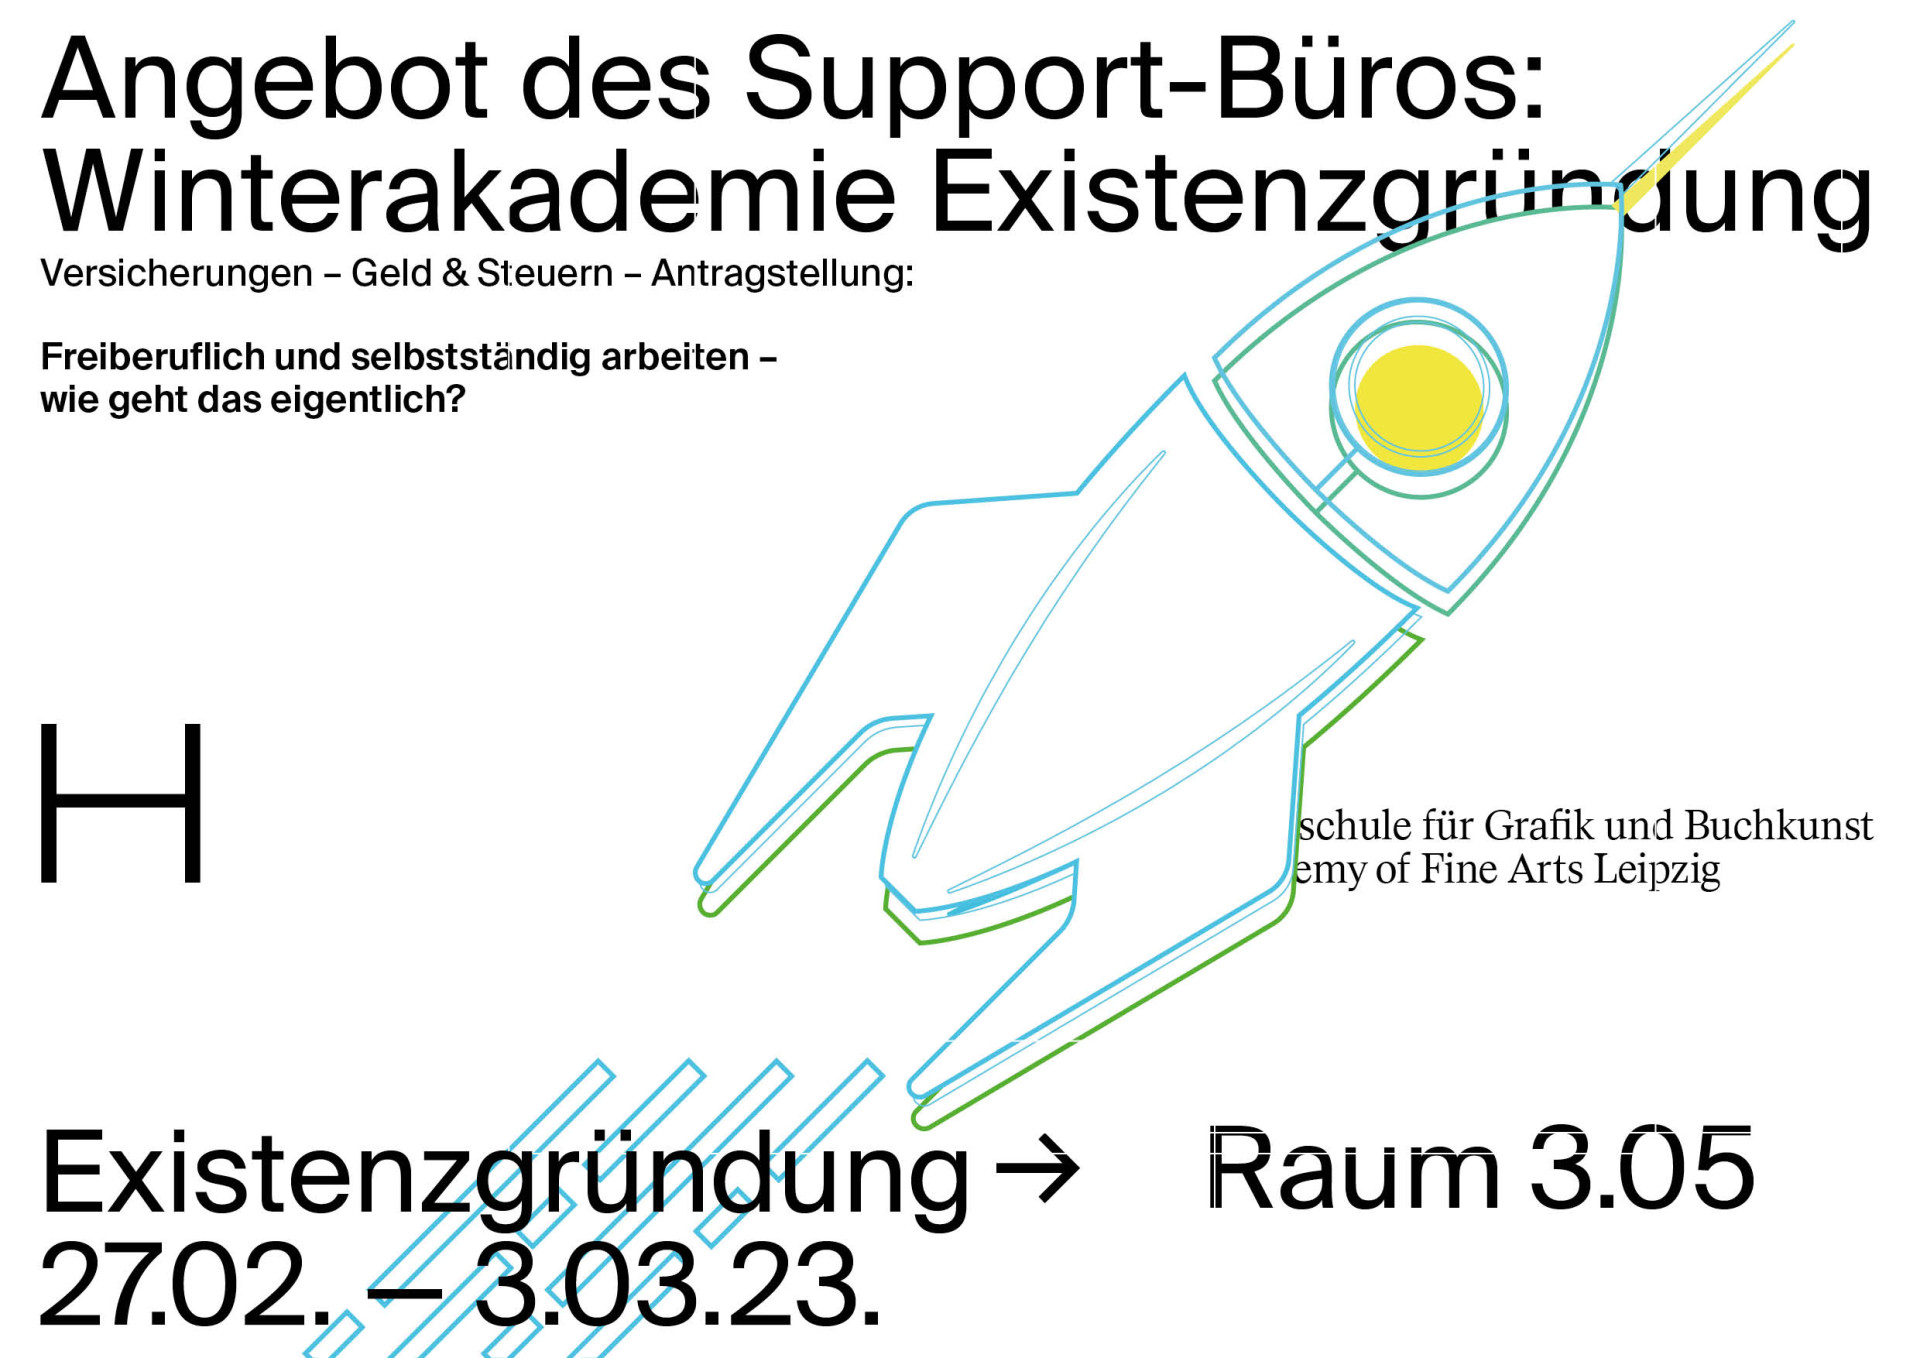 Start-Up-Week of the Support-Büro